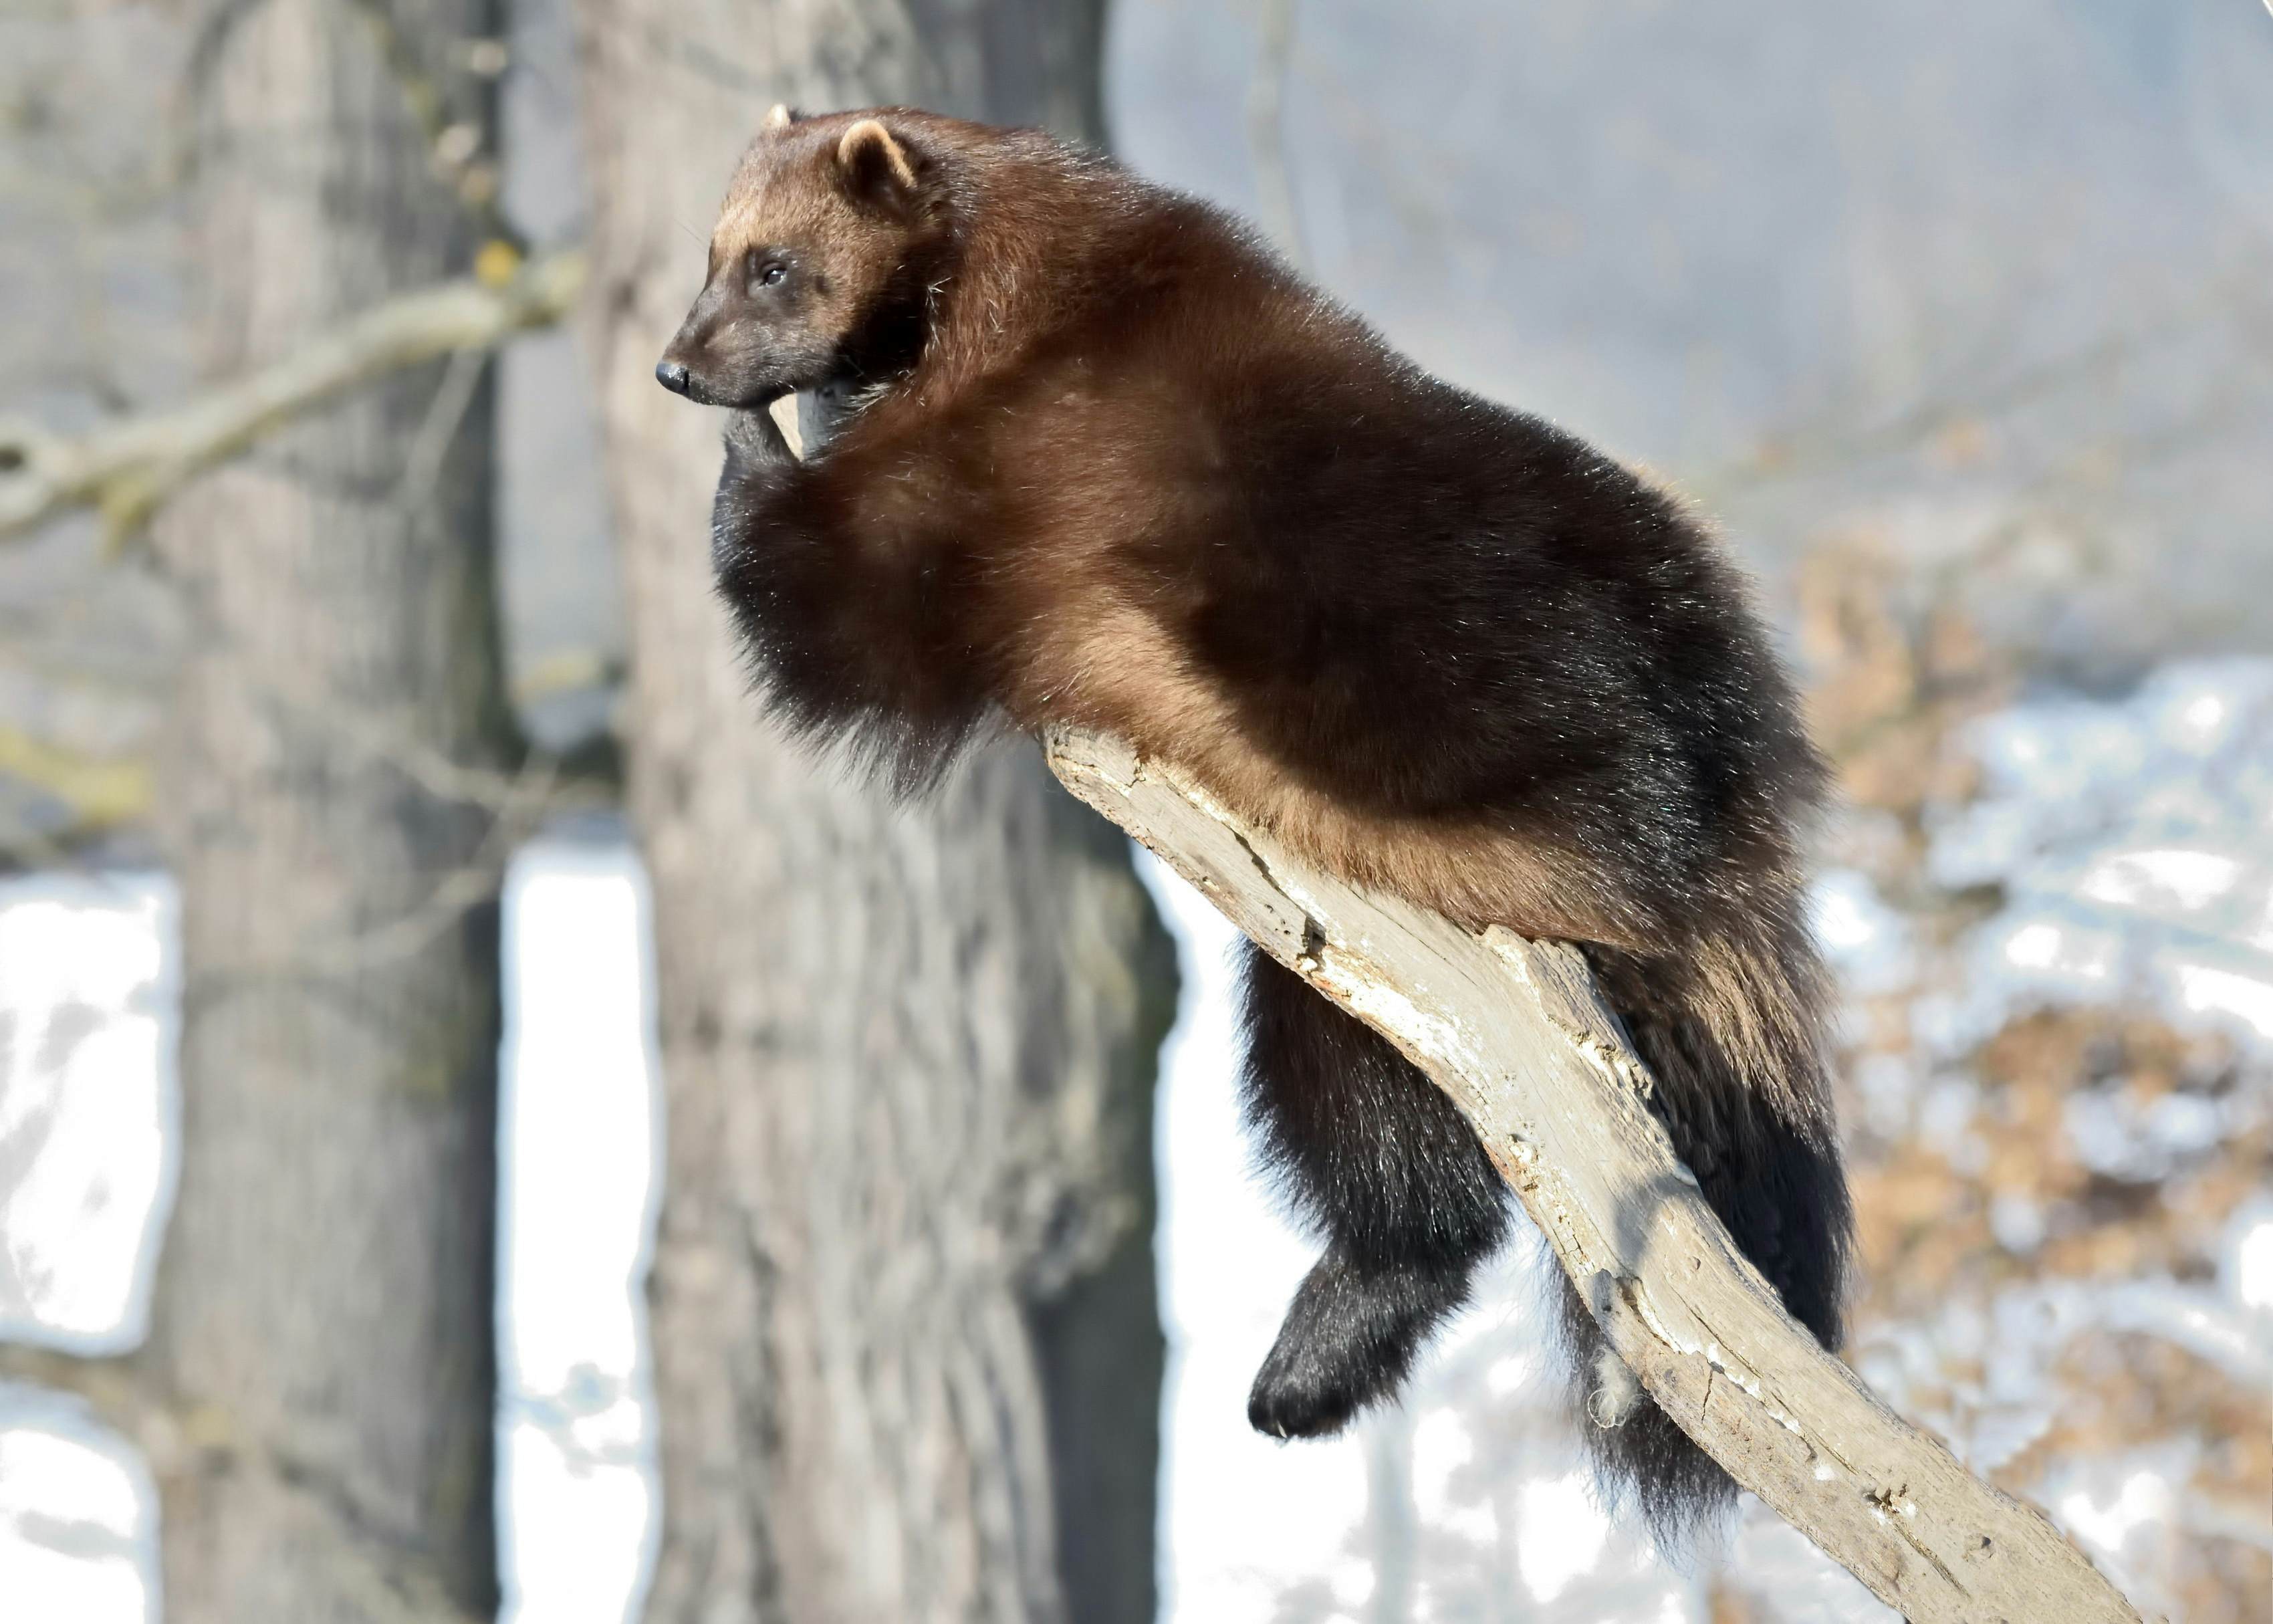 Wolverine caught on camera in Yellowstone for the first time - Lonely Planet